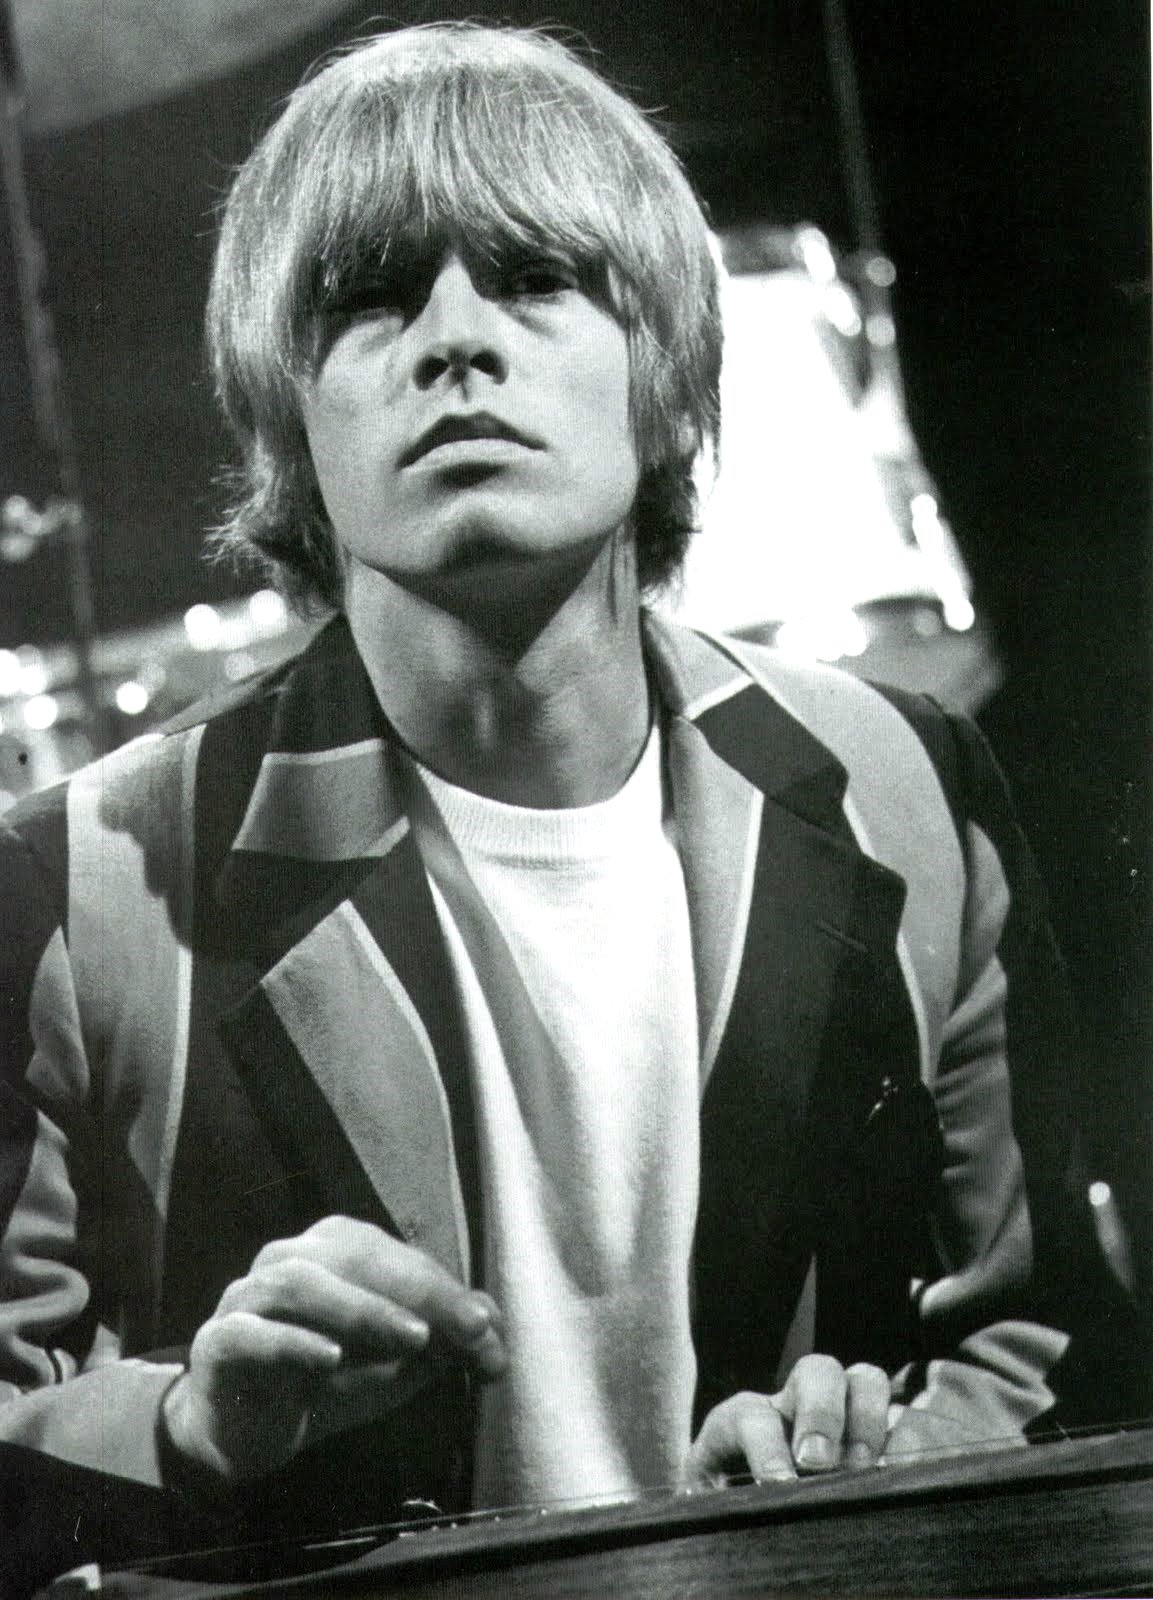 Happy birthday to Brian Jones, the founder of the Rolling Stones    